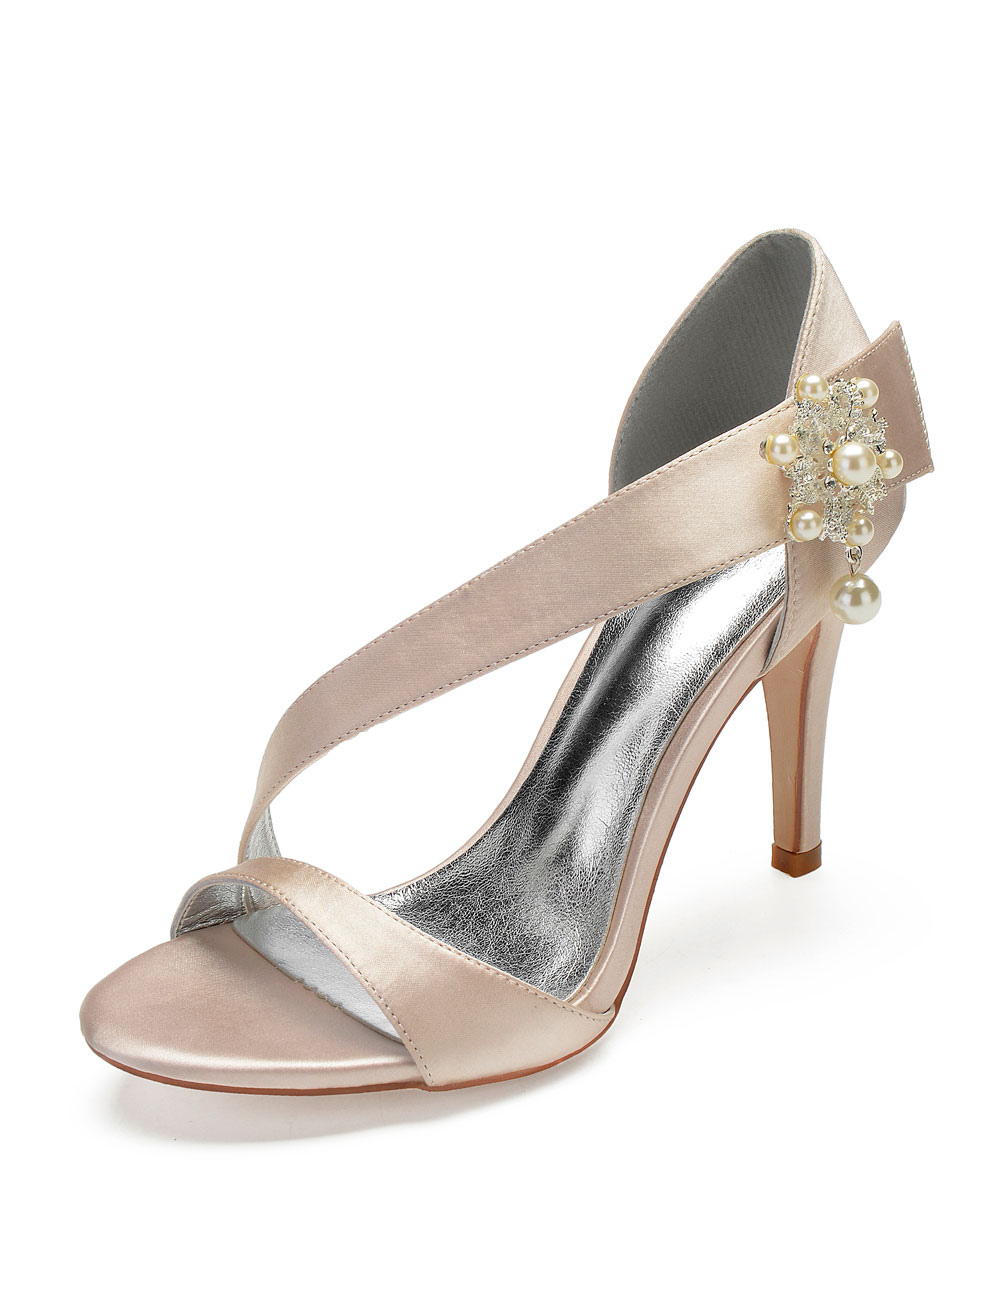 67 Confortable Champagne color wedding shoes for Happy New year